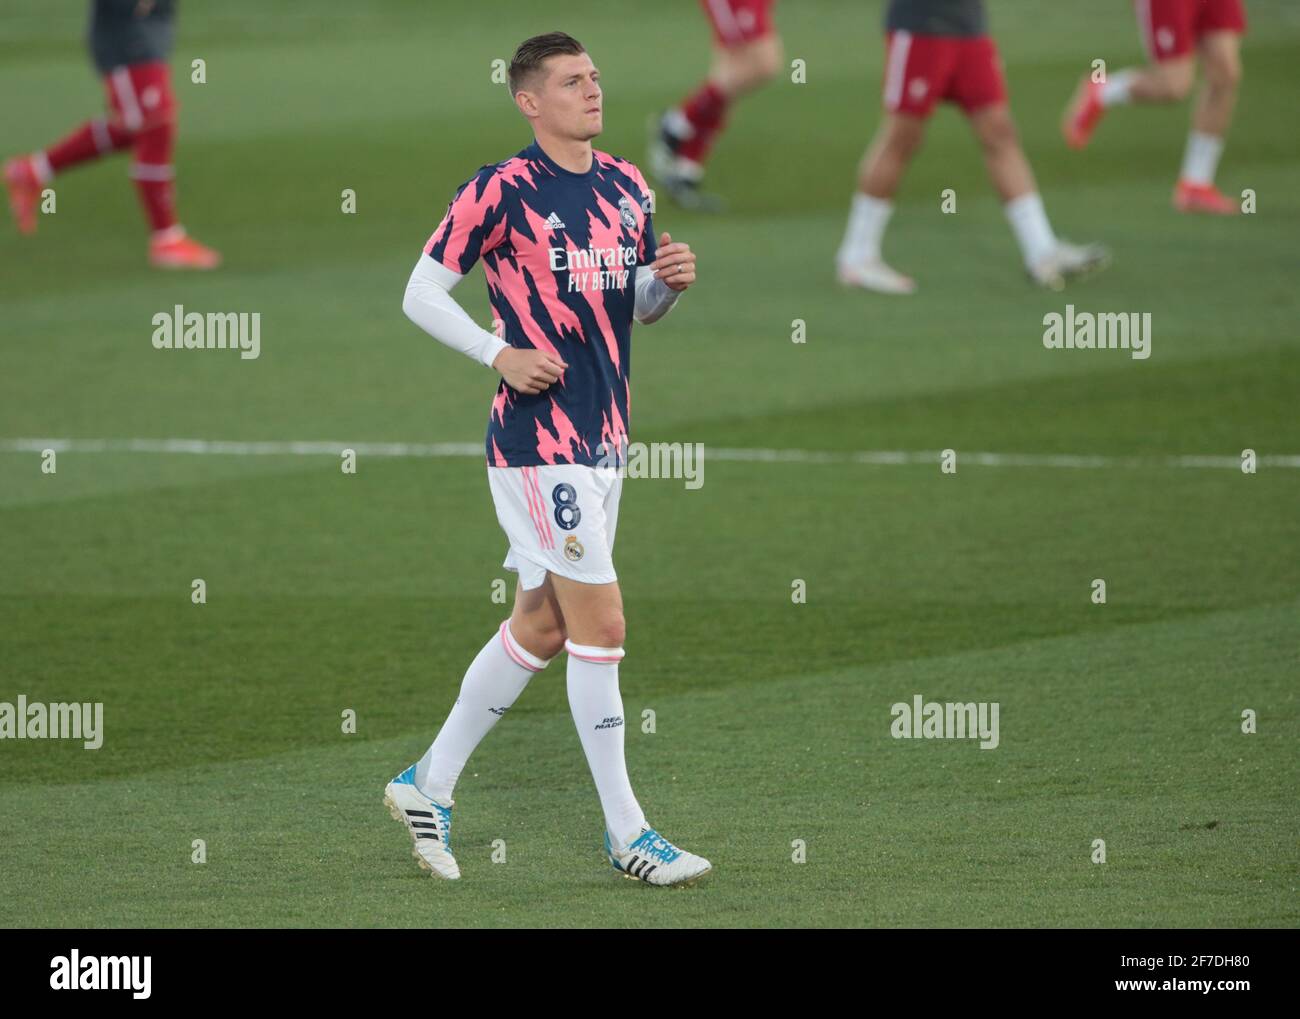 Madrid, Spain. 06th Apr, 2021. Madrid Spain; 06.04.2021.- Real Madrid against Liverpool Champions League quarter-finals 1st leg match held at the Alfredo Di Stefano Stadium in Madrid.Real Madrid player Toni Kroos | usage worldwide Credit: dpa/Alamy Live News Stock Photo